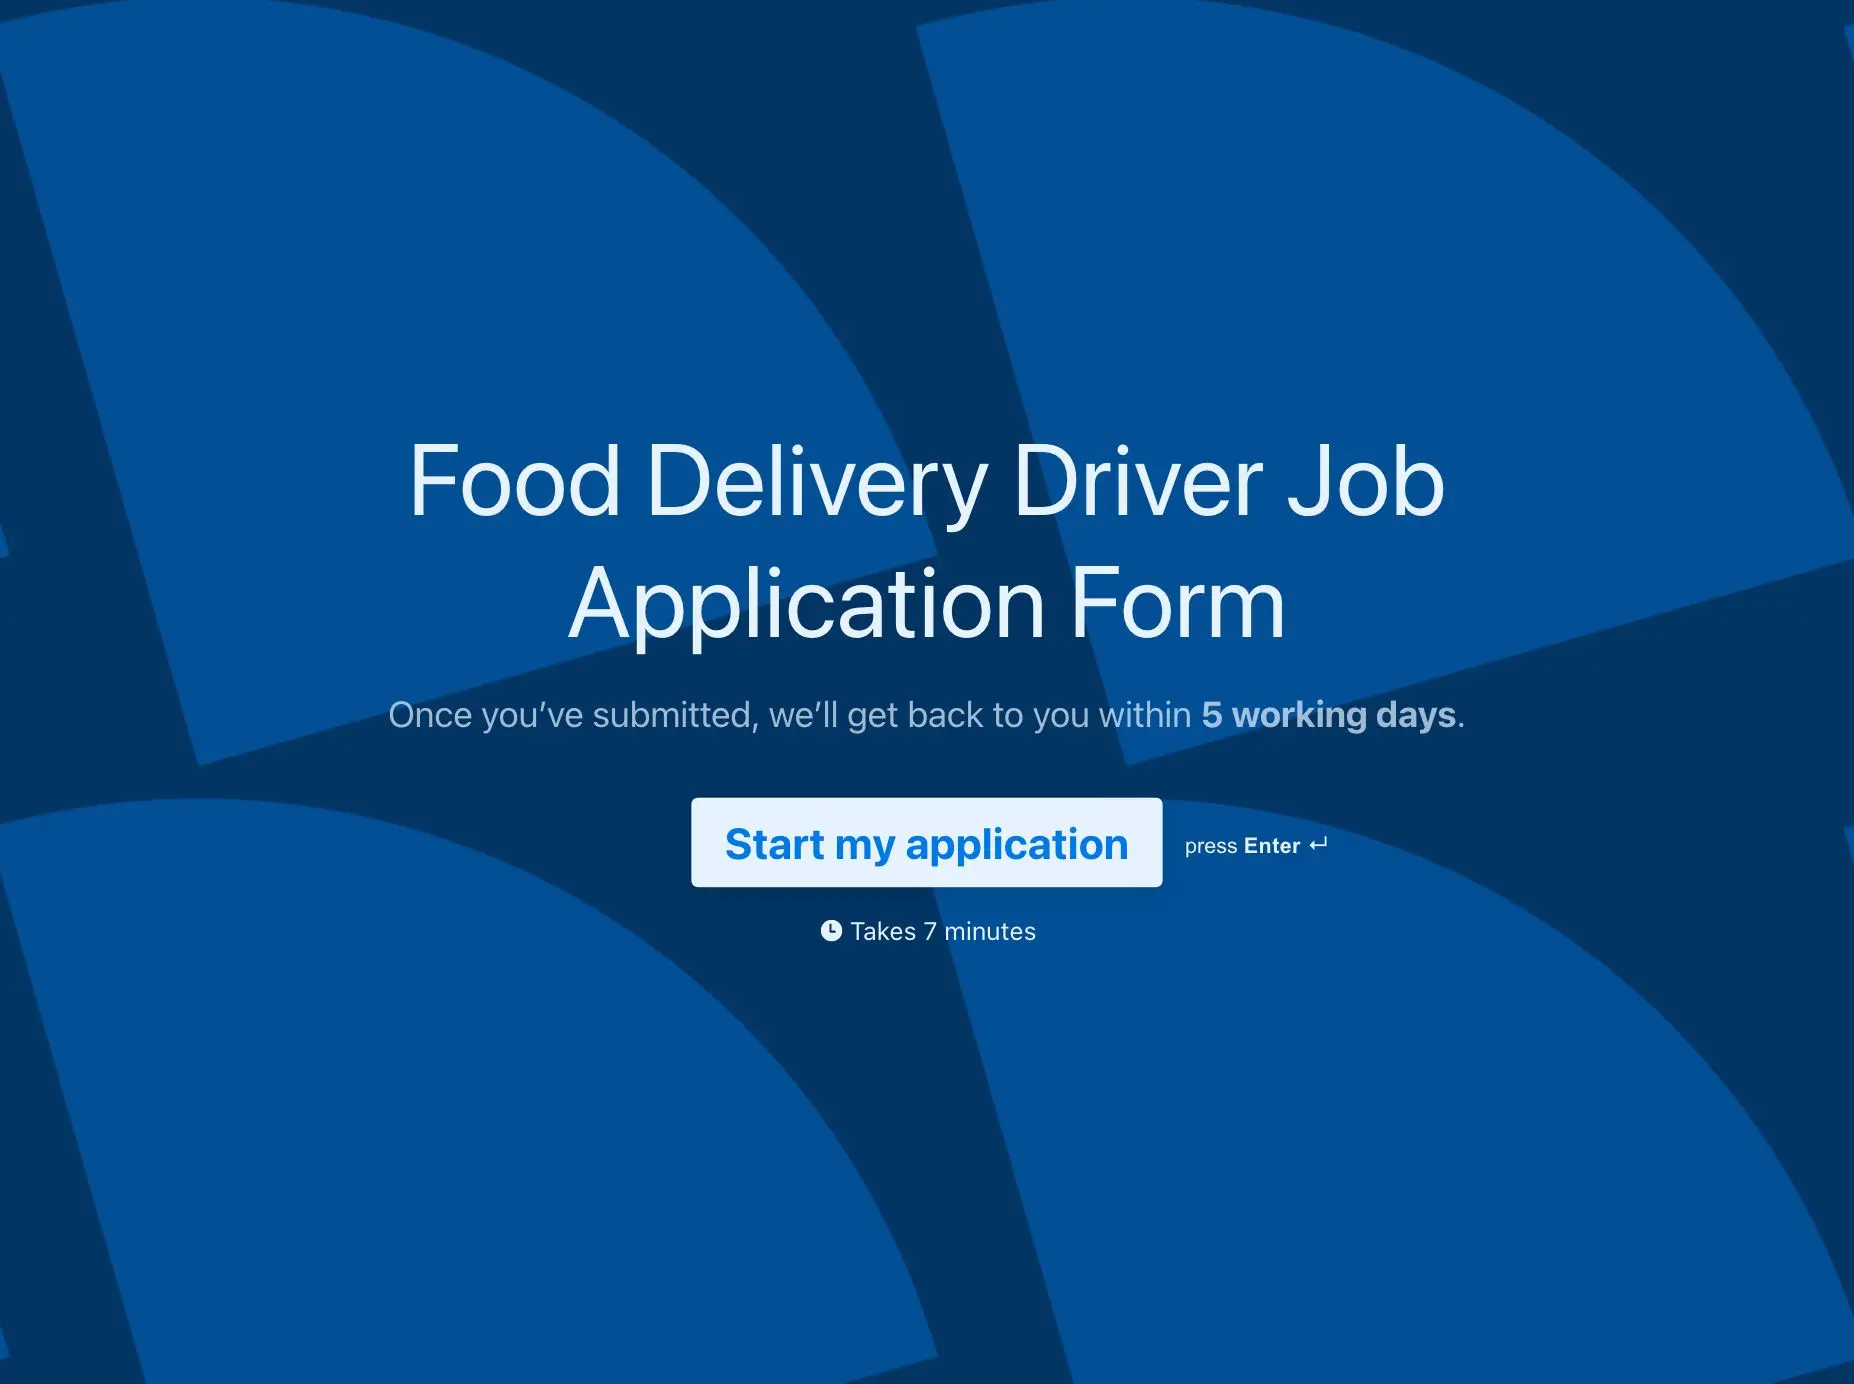 Food Delivery Driver Job Application Form Template Hero